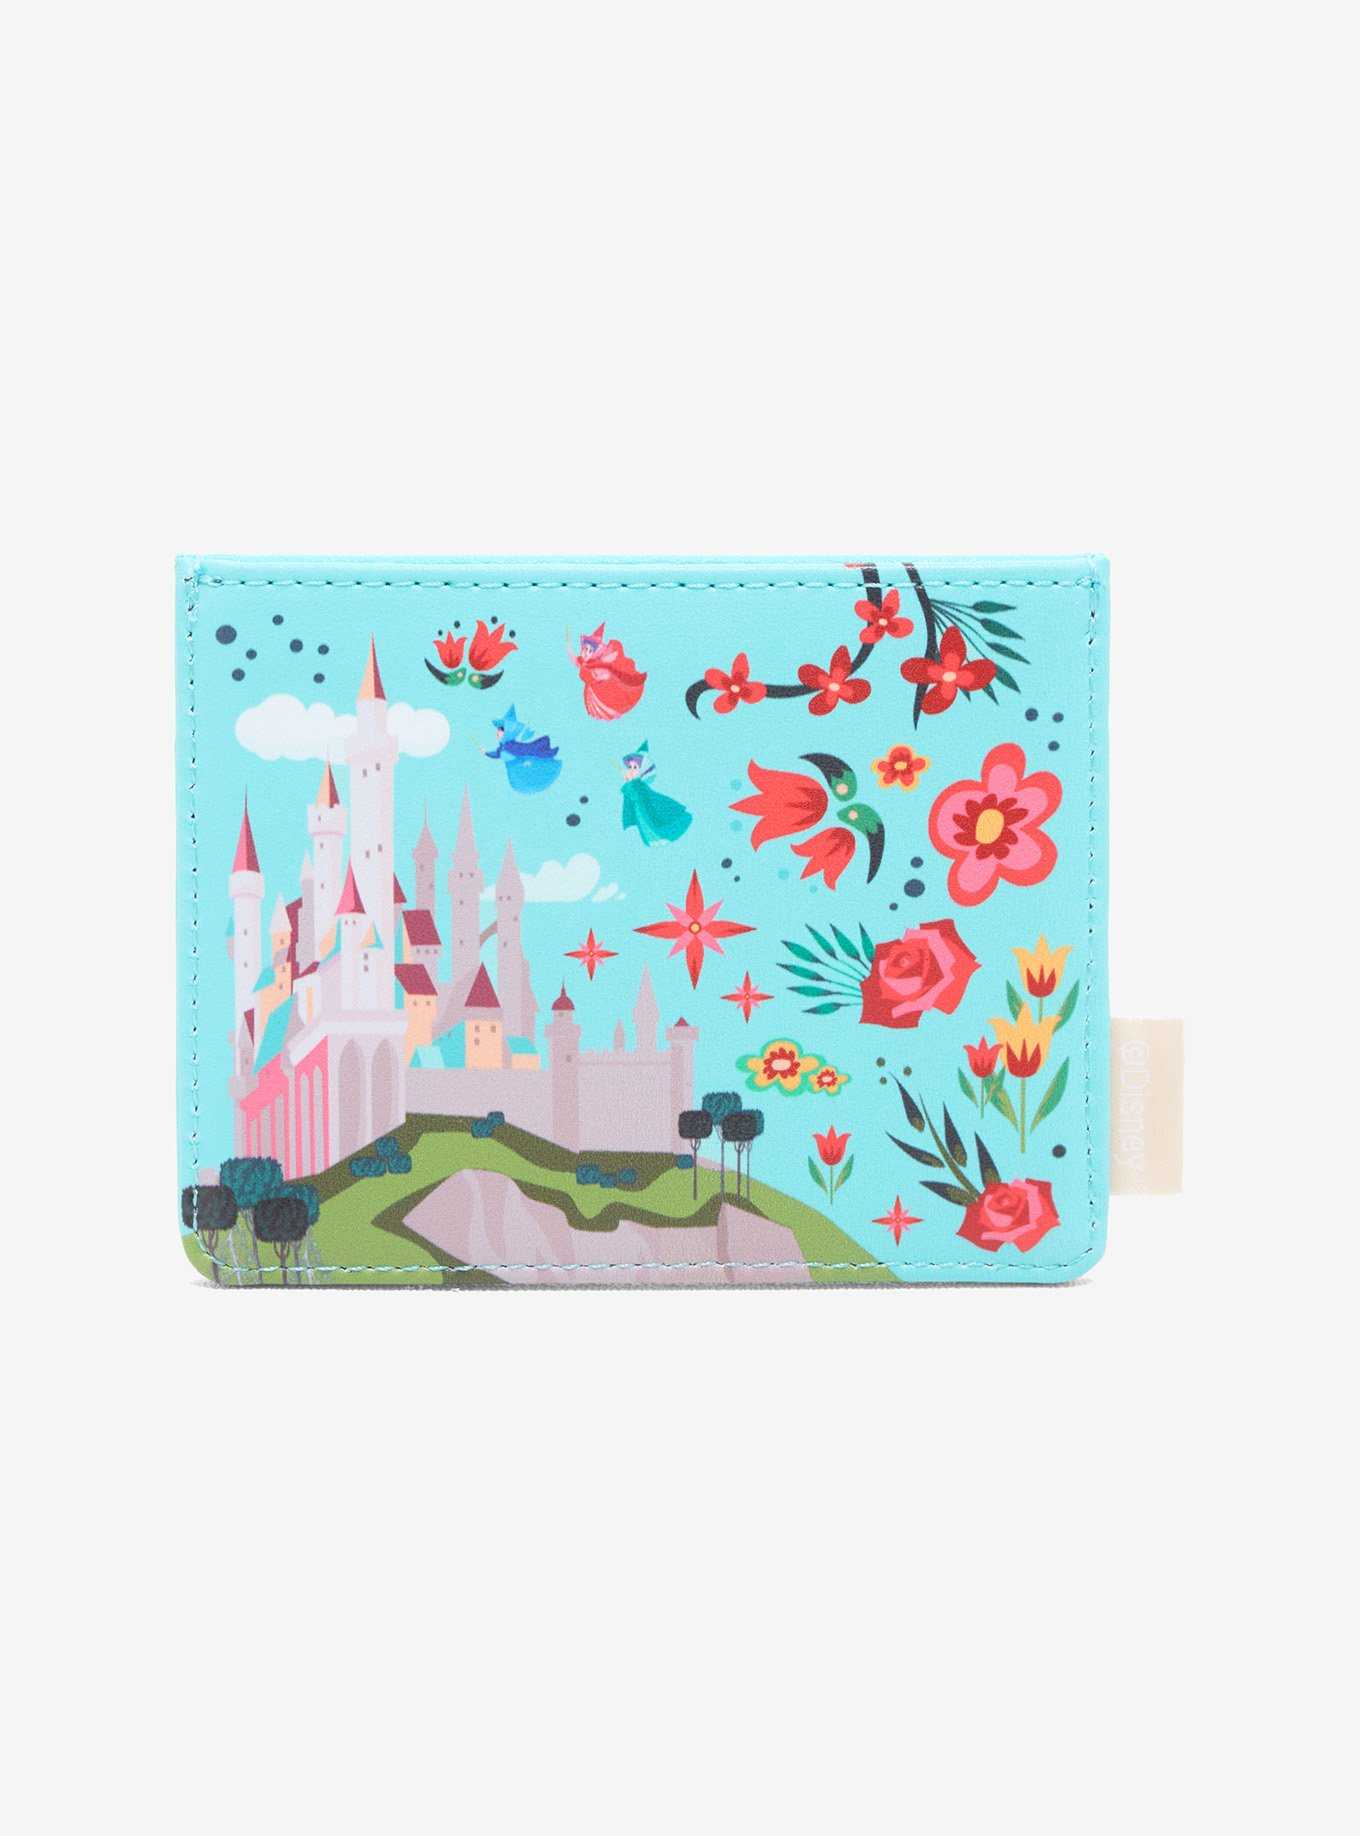 Loungefly Disney Sleeping Beauty Floral Aurora Cardholder - BoxLunch Exclusive, , hi-res